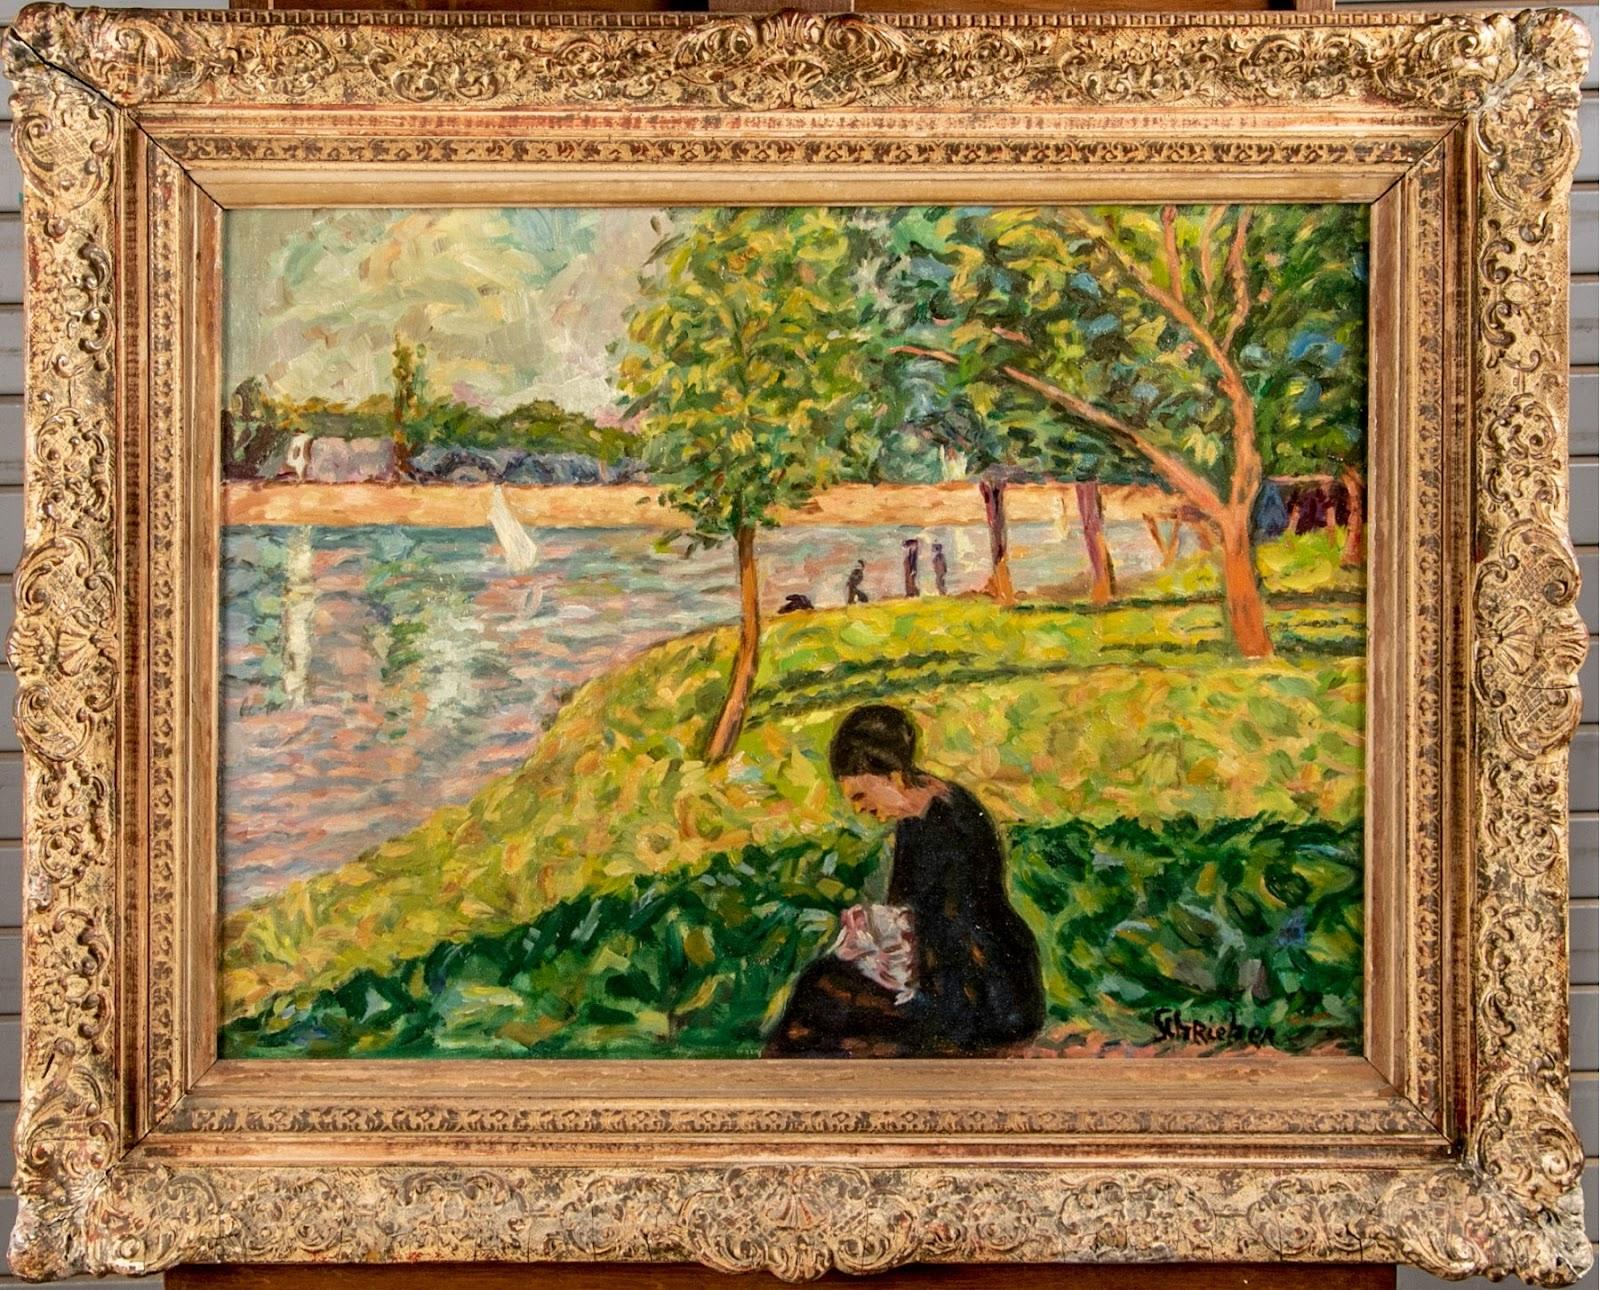 A lovely gilt frame surrounds this painting of a lady sitting by a lake.